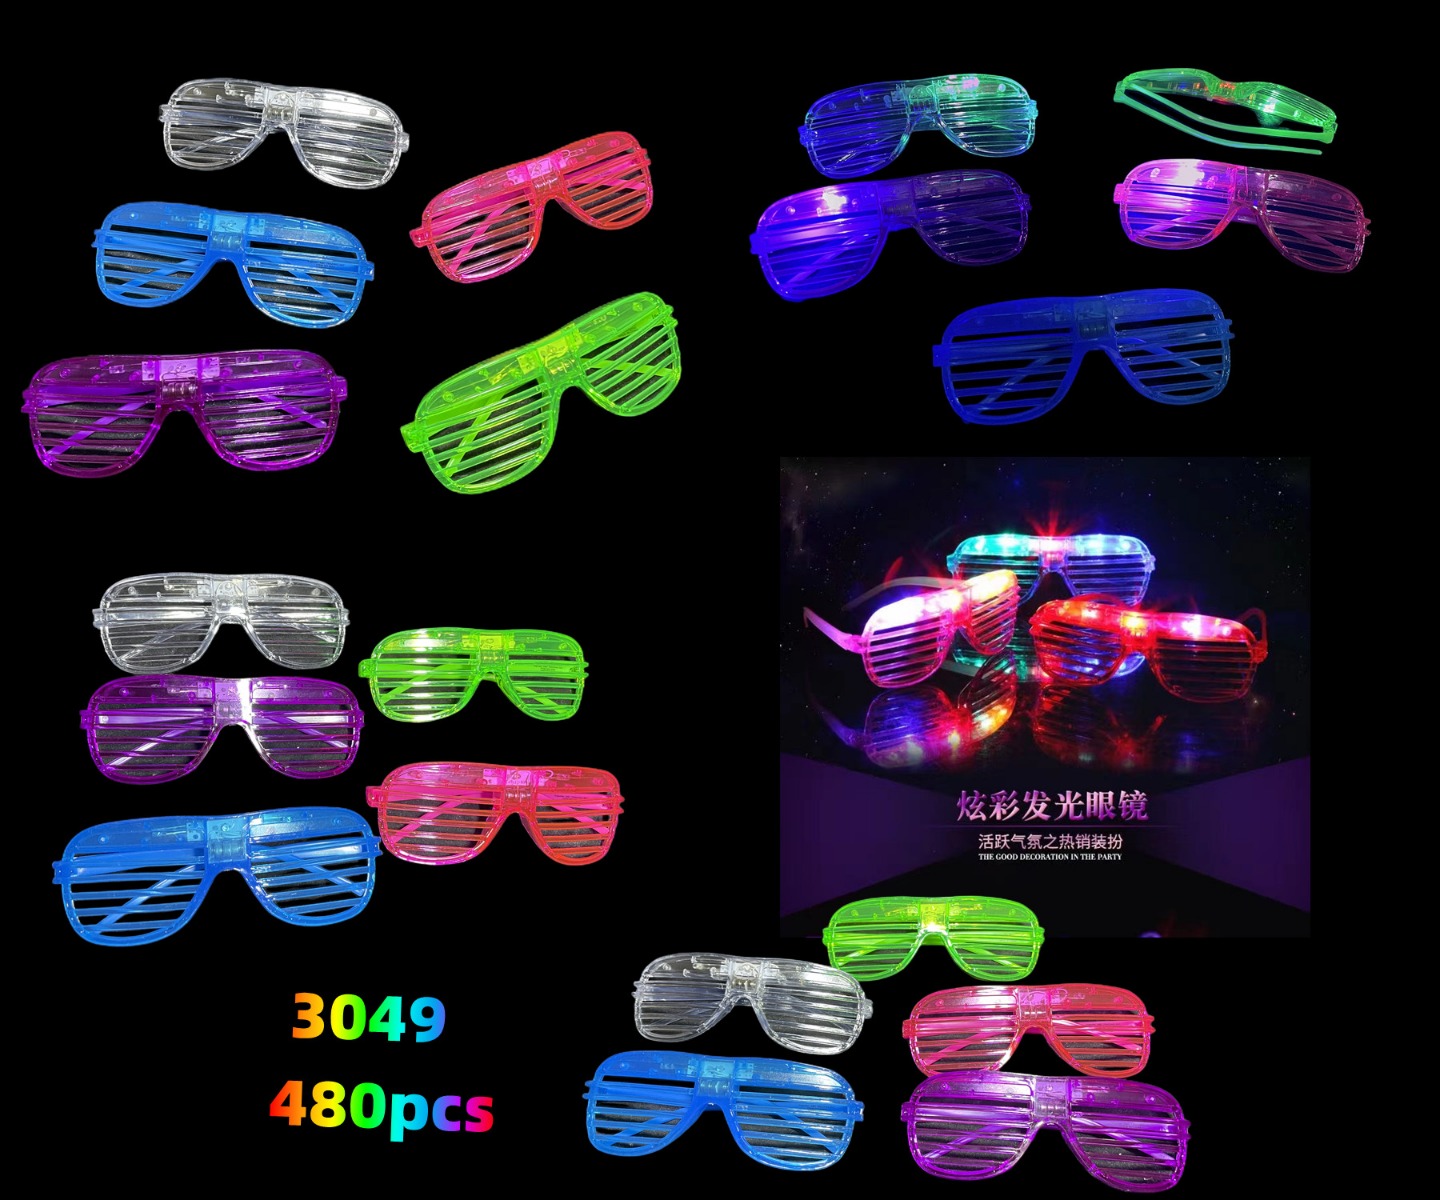 ''SHADOW GLASSES LIGHT UP, SOLD BY THE DOZEN''